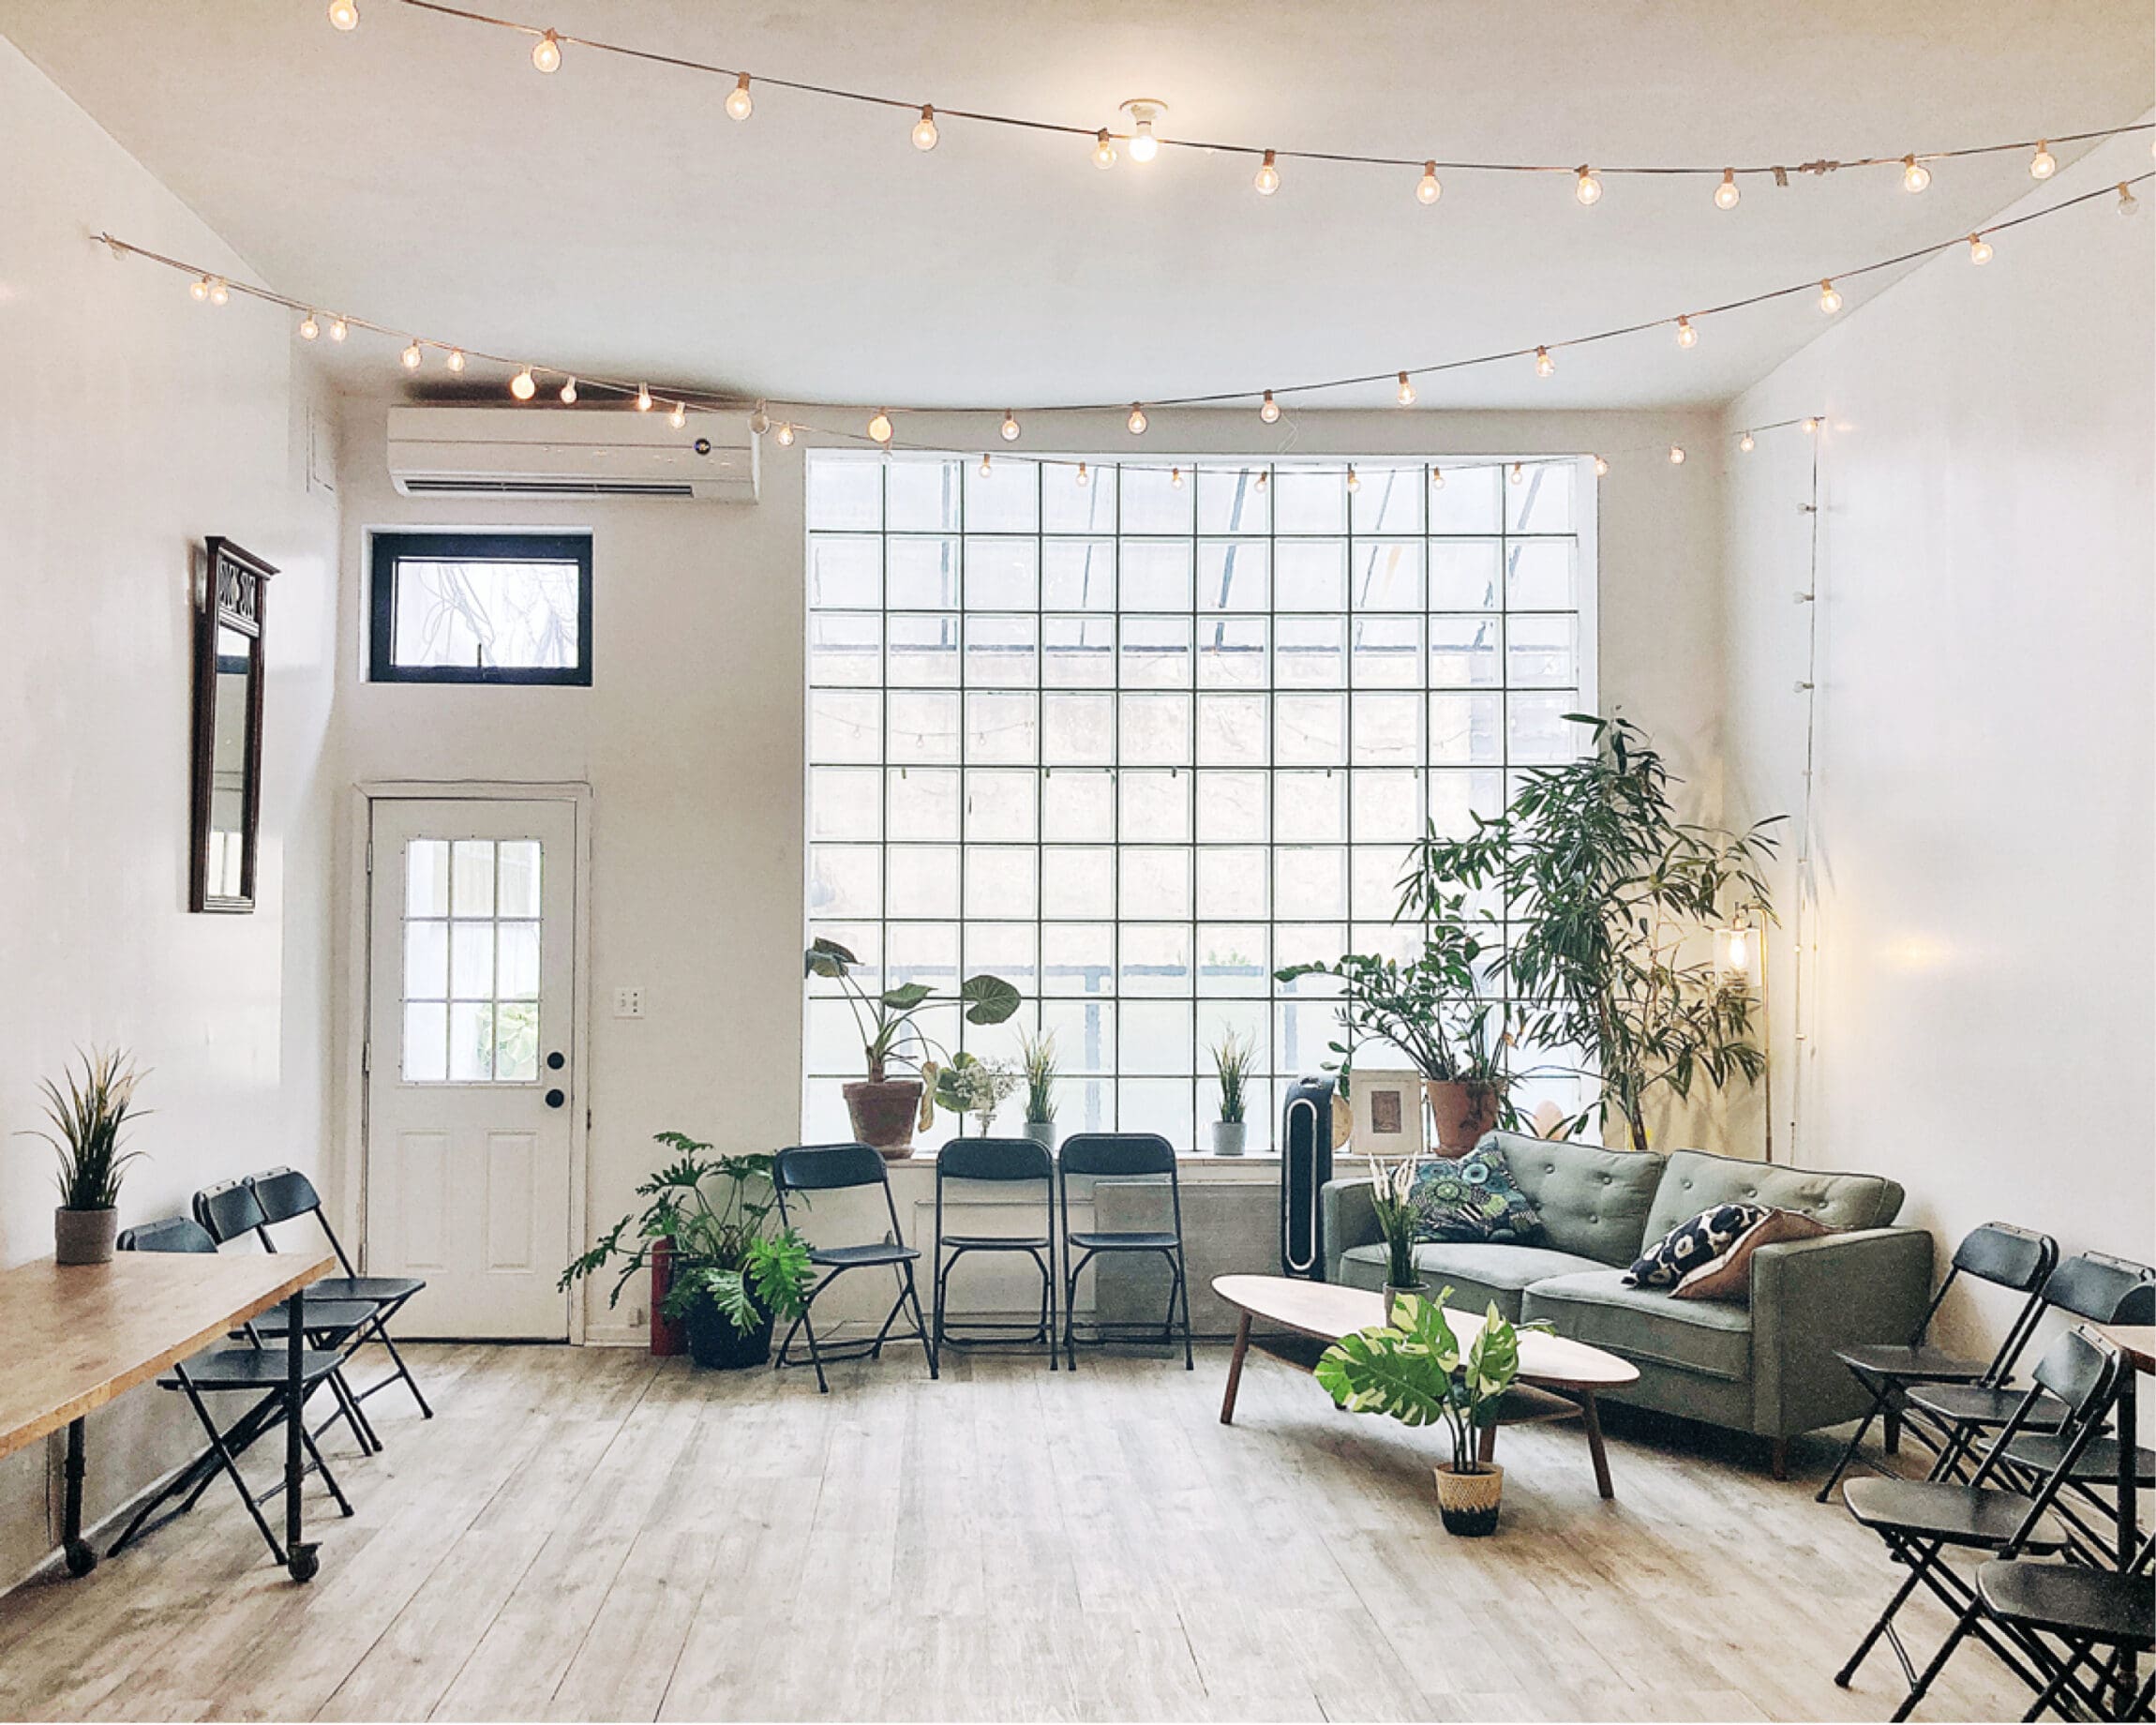 The best co-working space in New York | Couches, chairs, plants line the walls leaving the middle of the room empty.